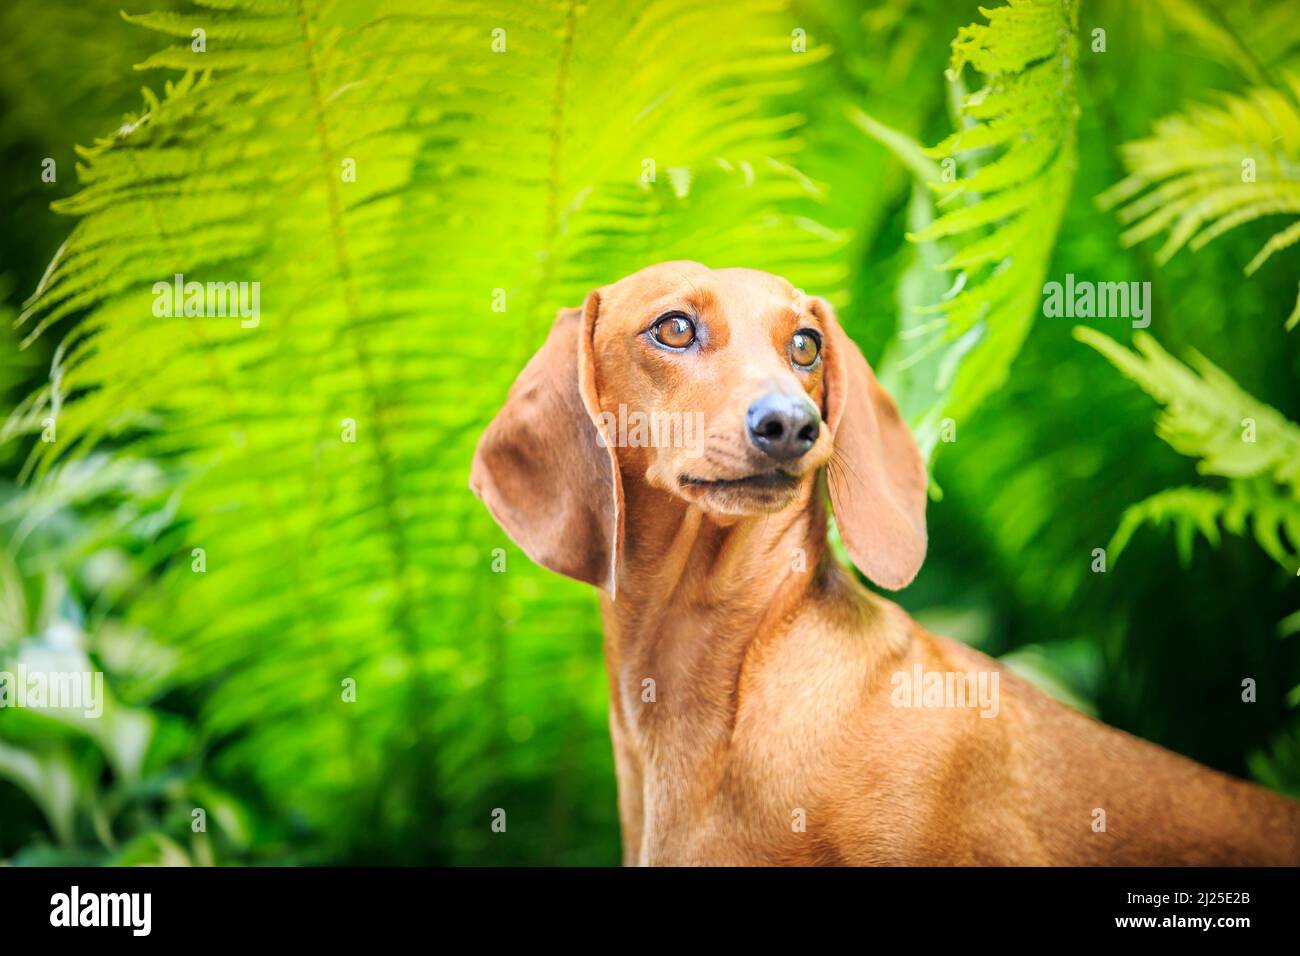 Smooth Dachshund. Portrait of adult dog with fern fronds in background. Germany Stock Photo